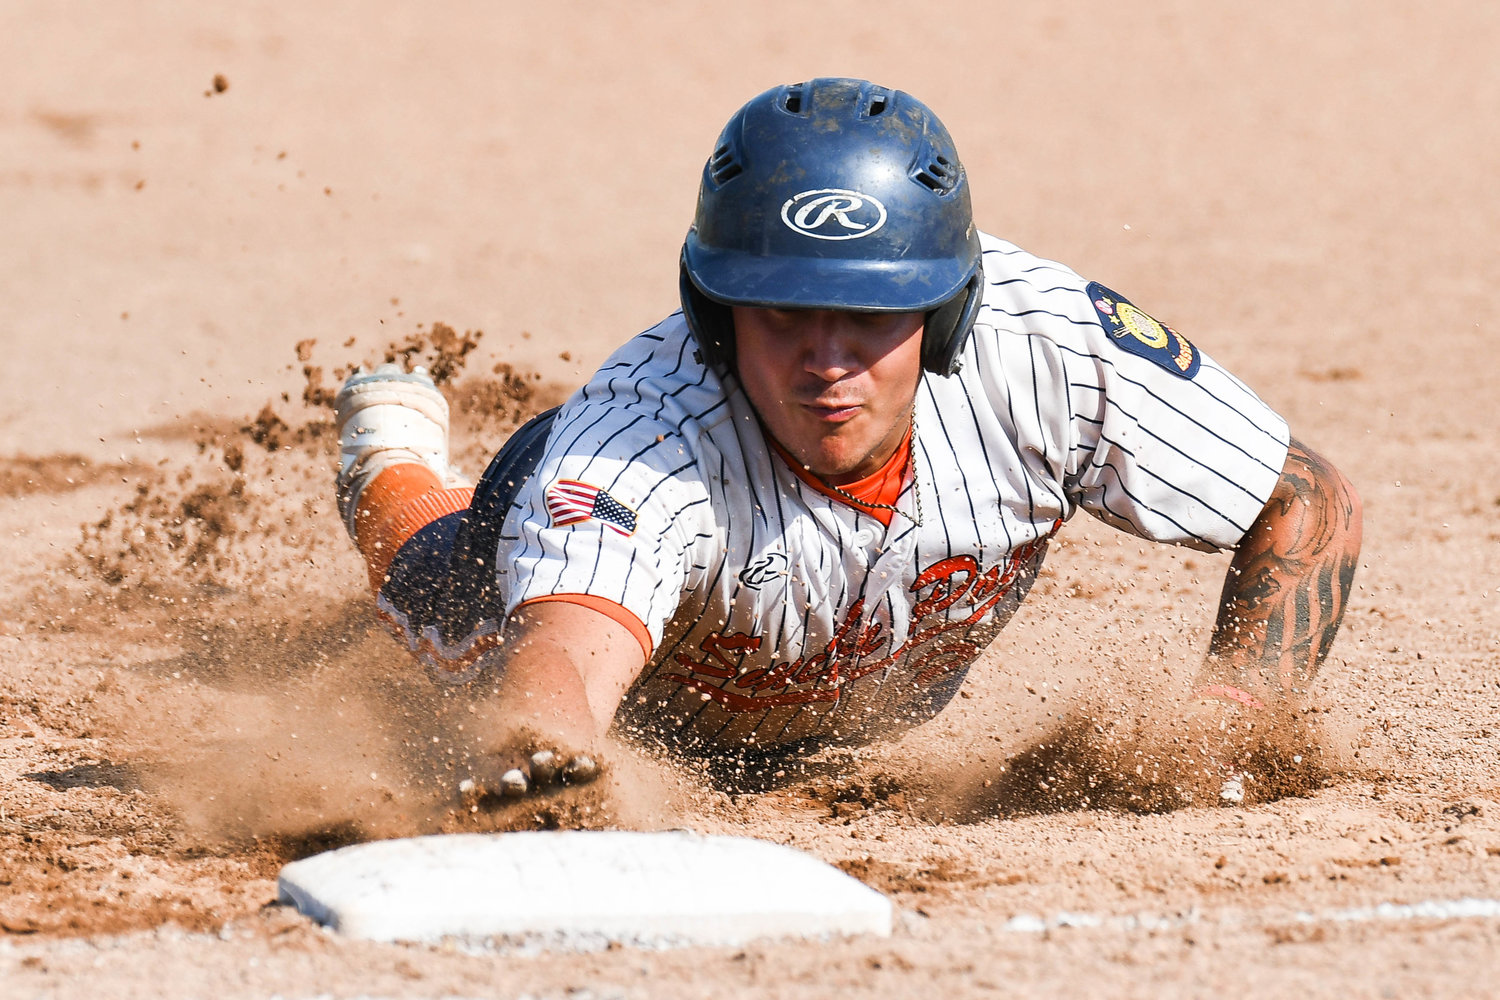 Smith Post baserunner Damon Campanaro slides safely back into first base during the District V American Legion championship game against Whitestown Post on Tuesday at DeLutis Field in Rome. Whitestown won 1-0 in eight innings.